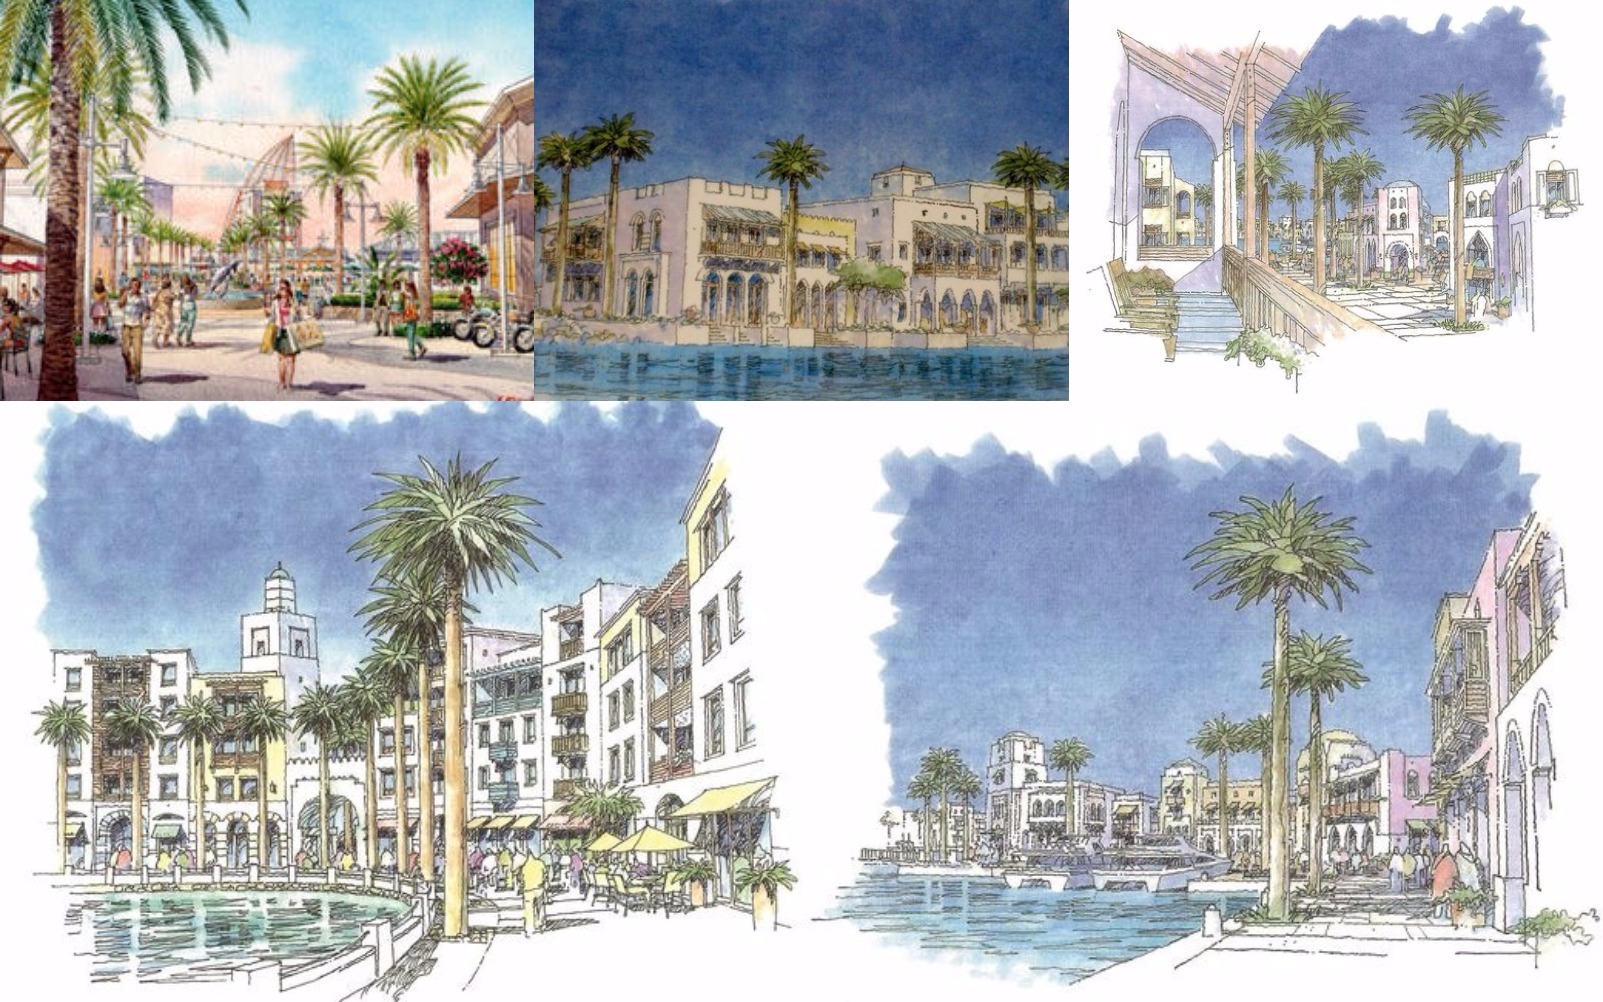 Conceptual drawings provided to Port Canaveral by Watersmark, LLC